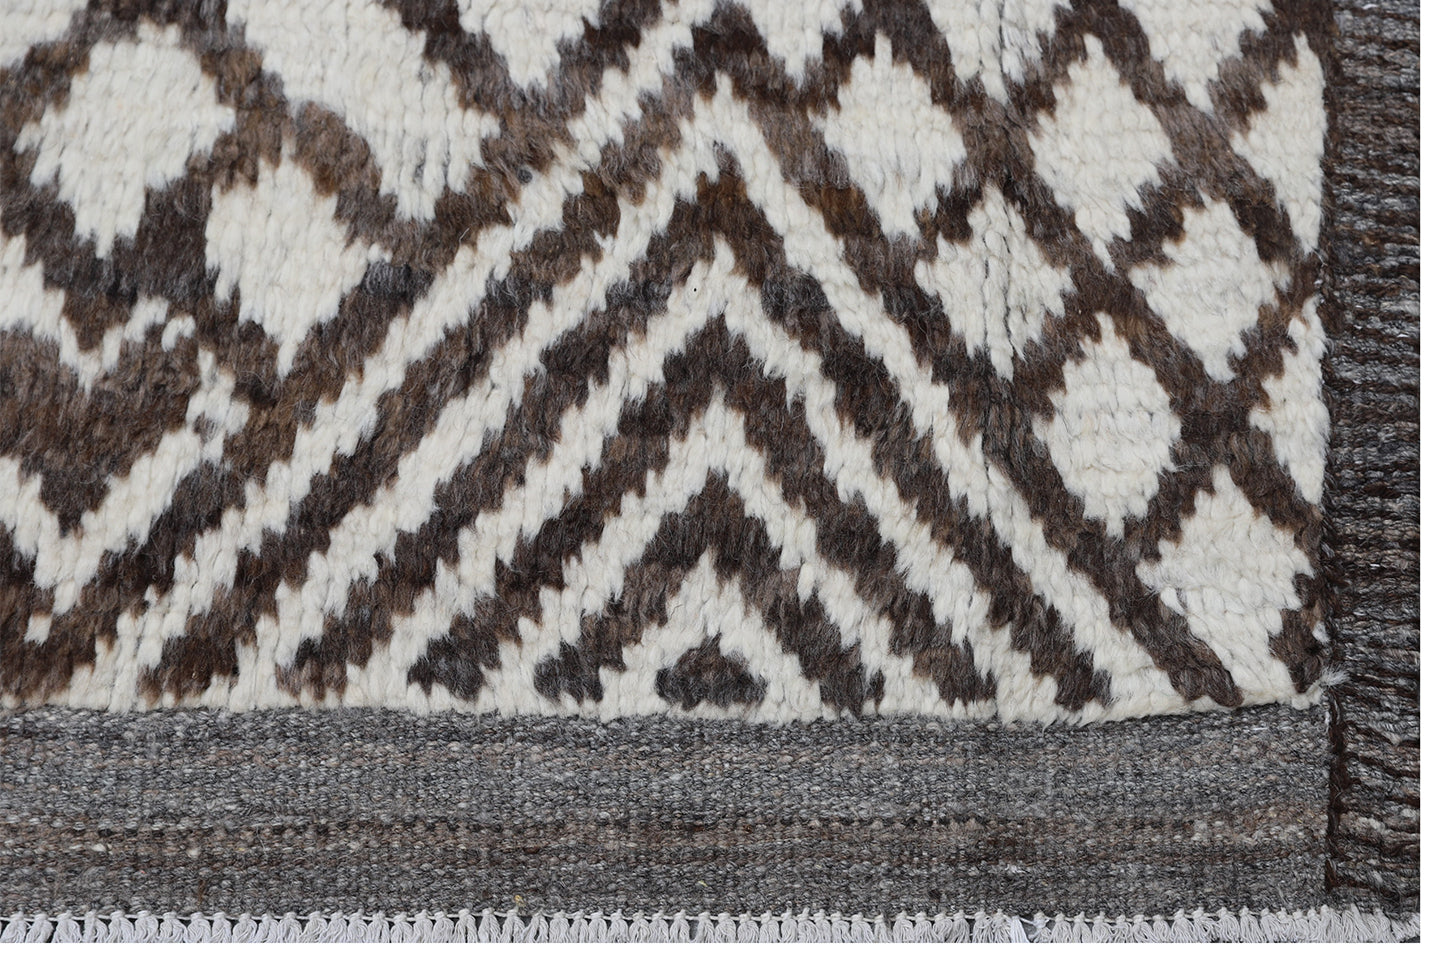 8'x12' Geometric Patchwork Design Moroccan Style Brown and White Barchi Rug